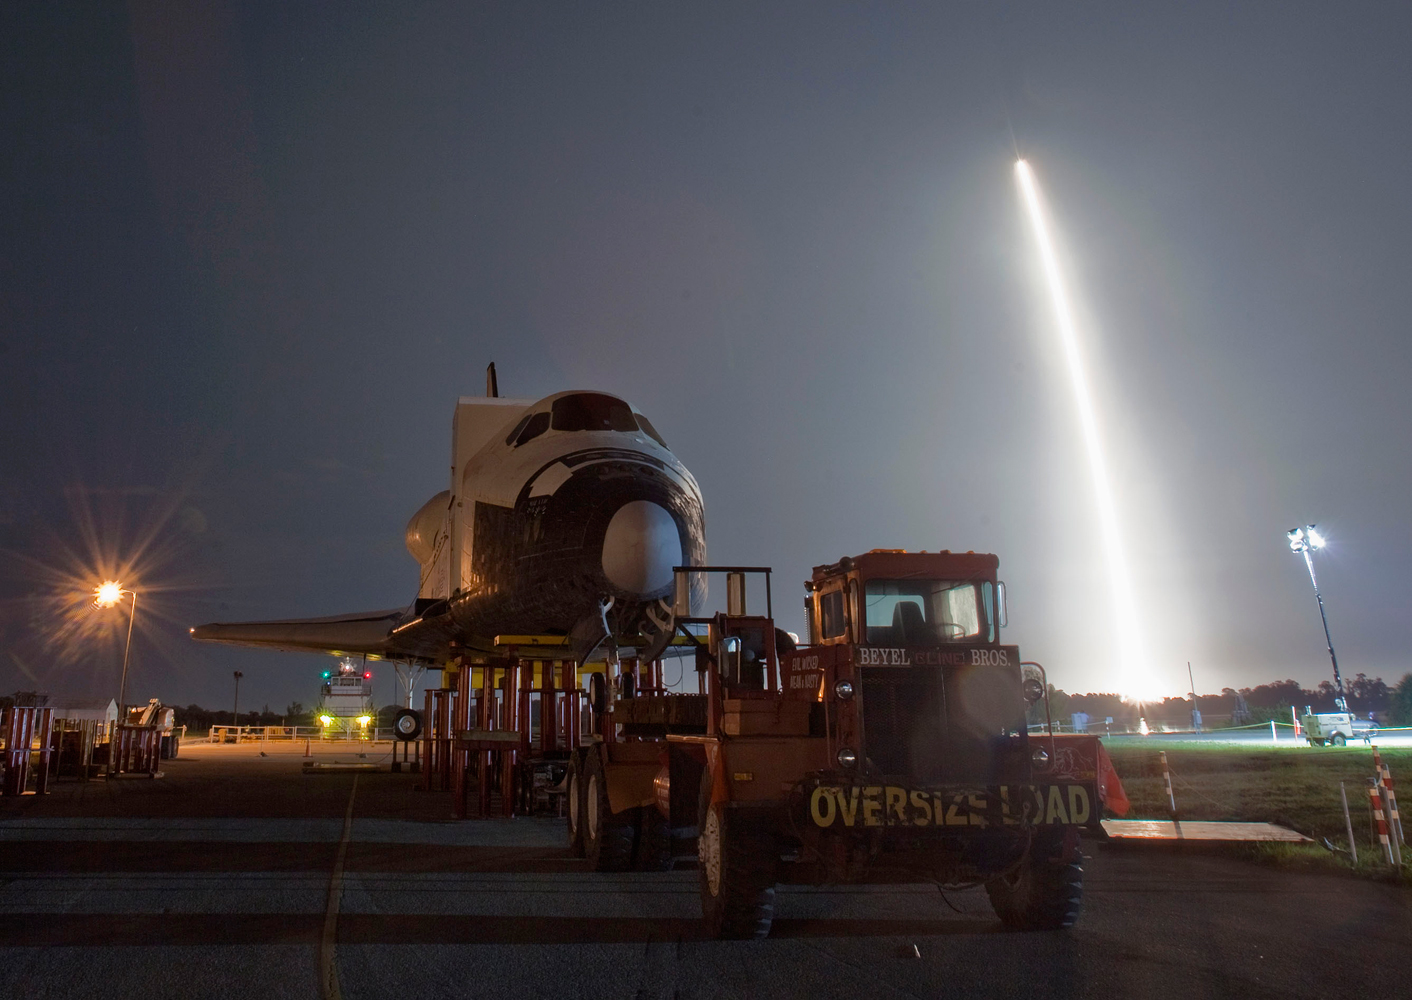 The SpaceX Falcon 9 test rocket lifts off from Space Launch Complex 40 at Cape Canaveral on May 22, 2012.